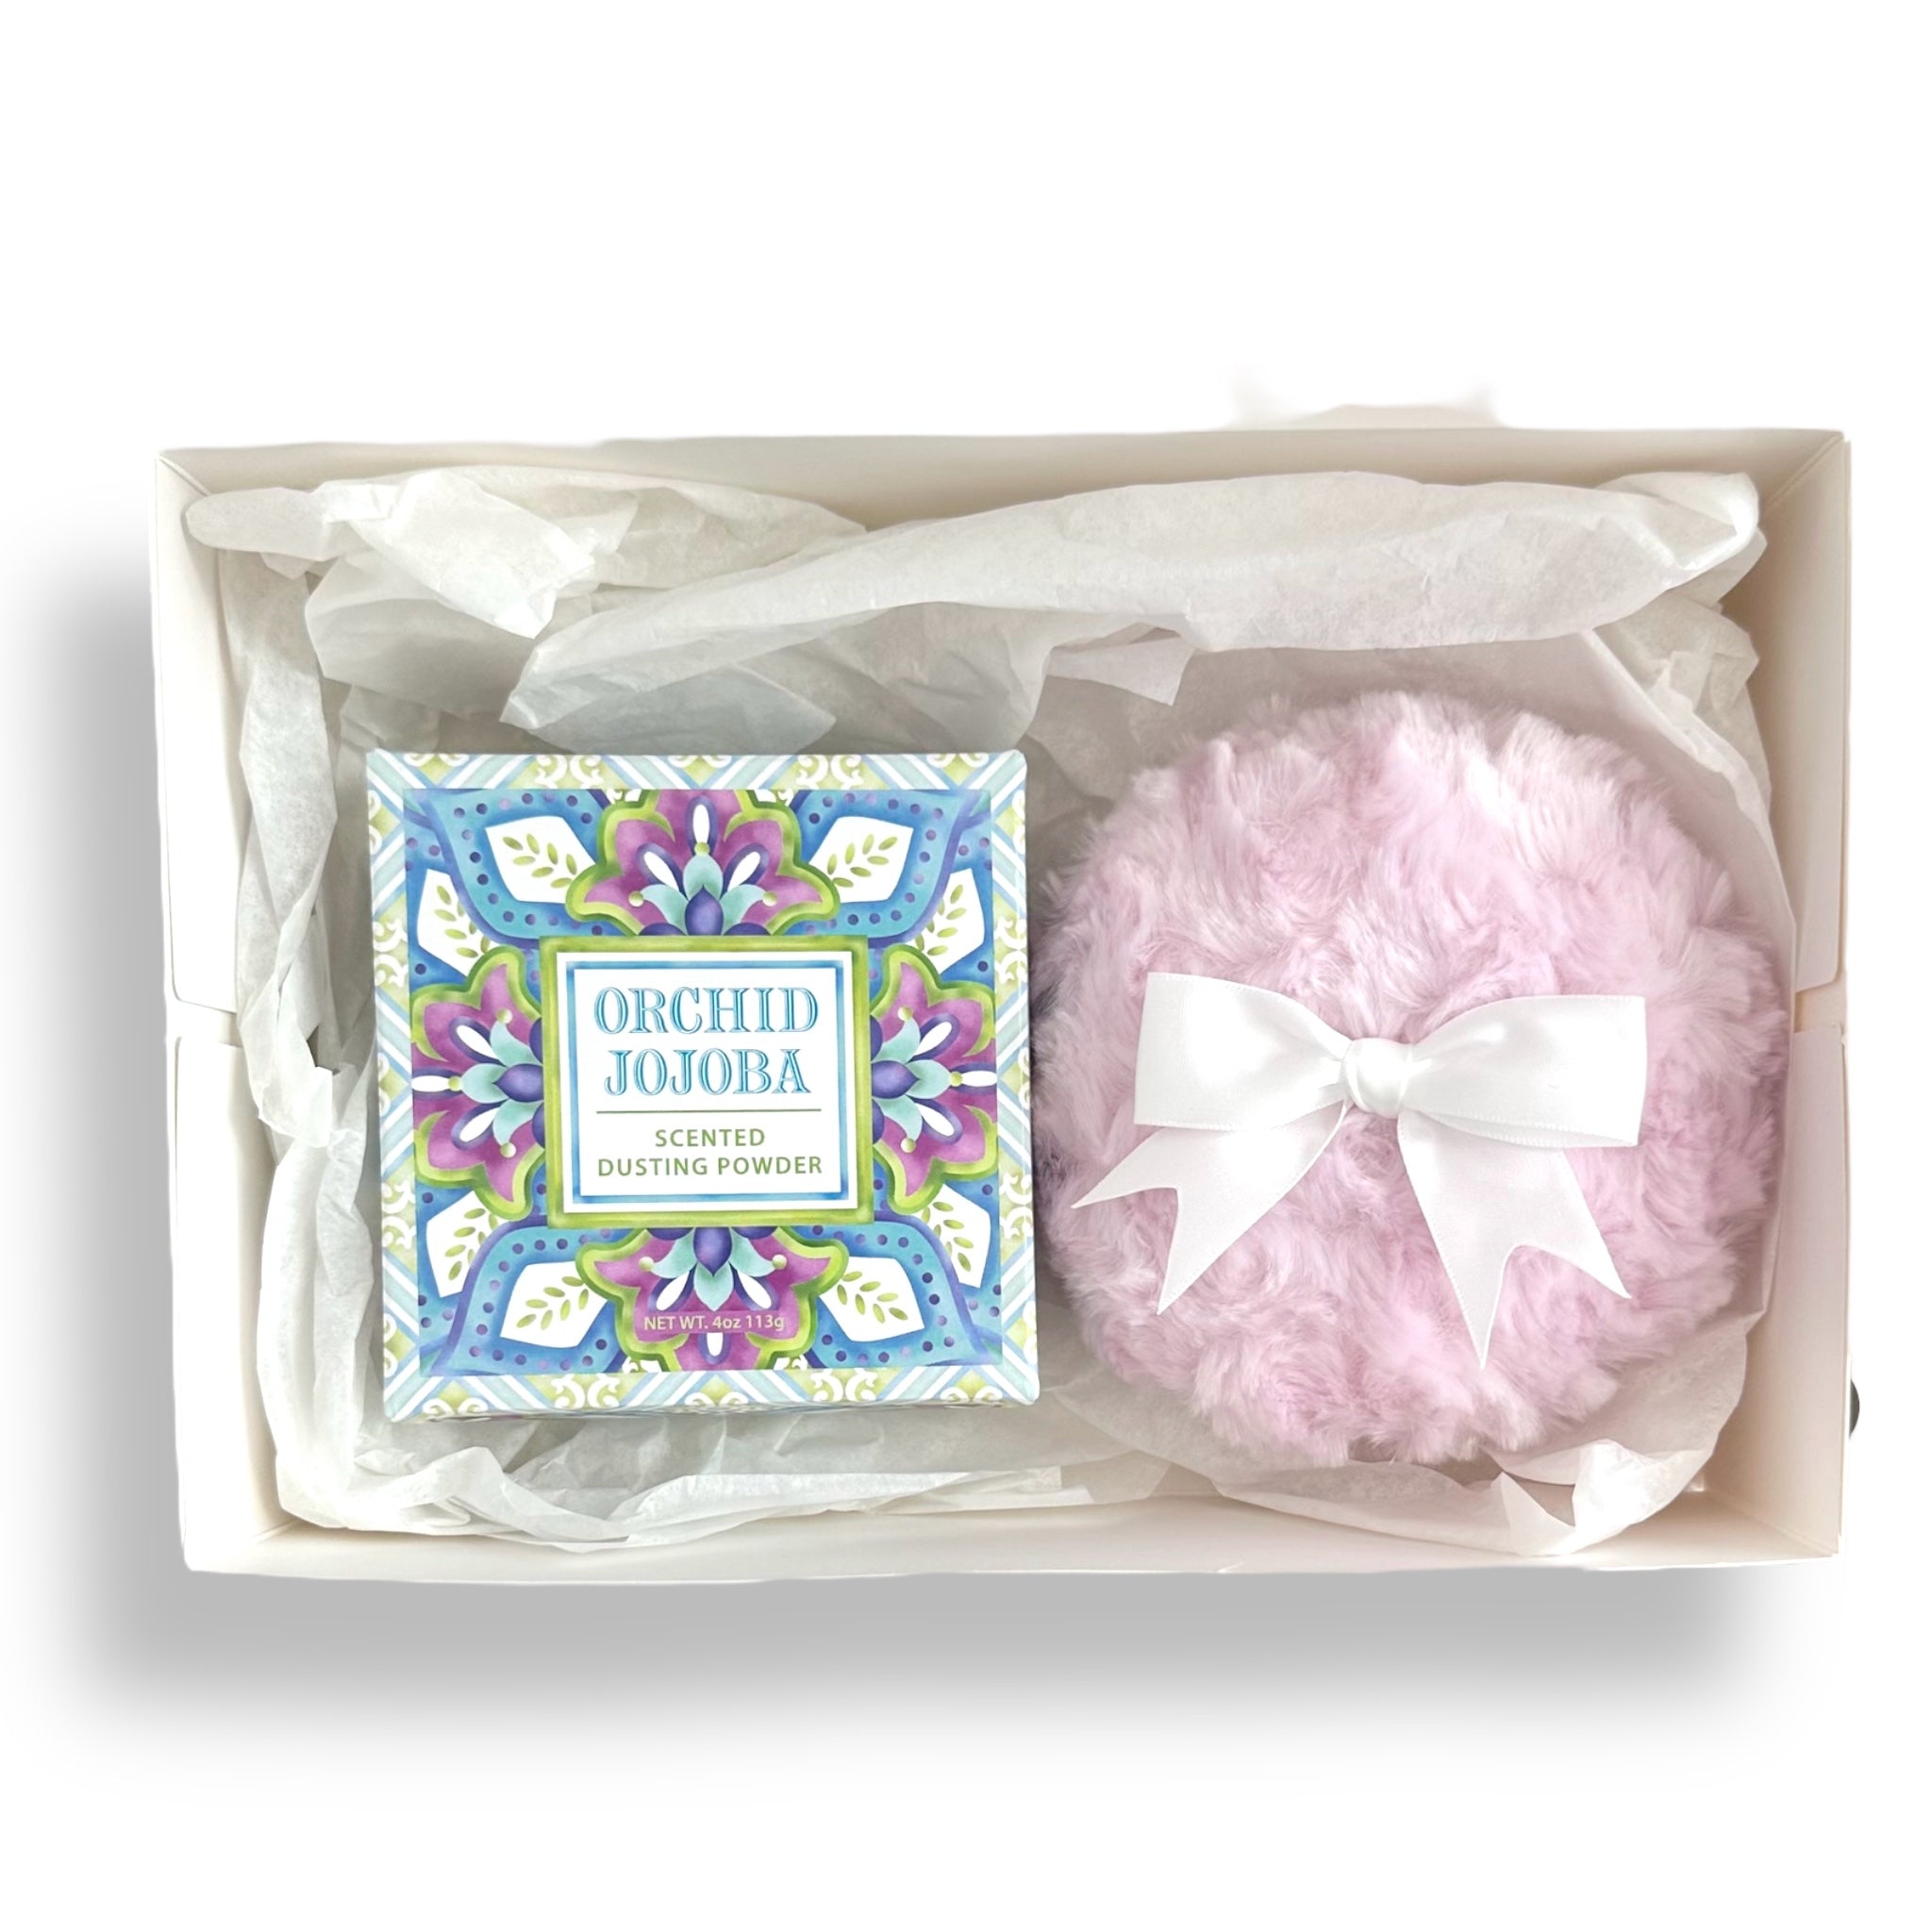 Dusting Powder & Puff GIFT SET - Greenwich Bay Trading Company + Luxe Puffs 